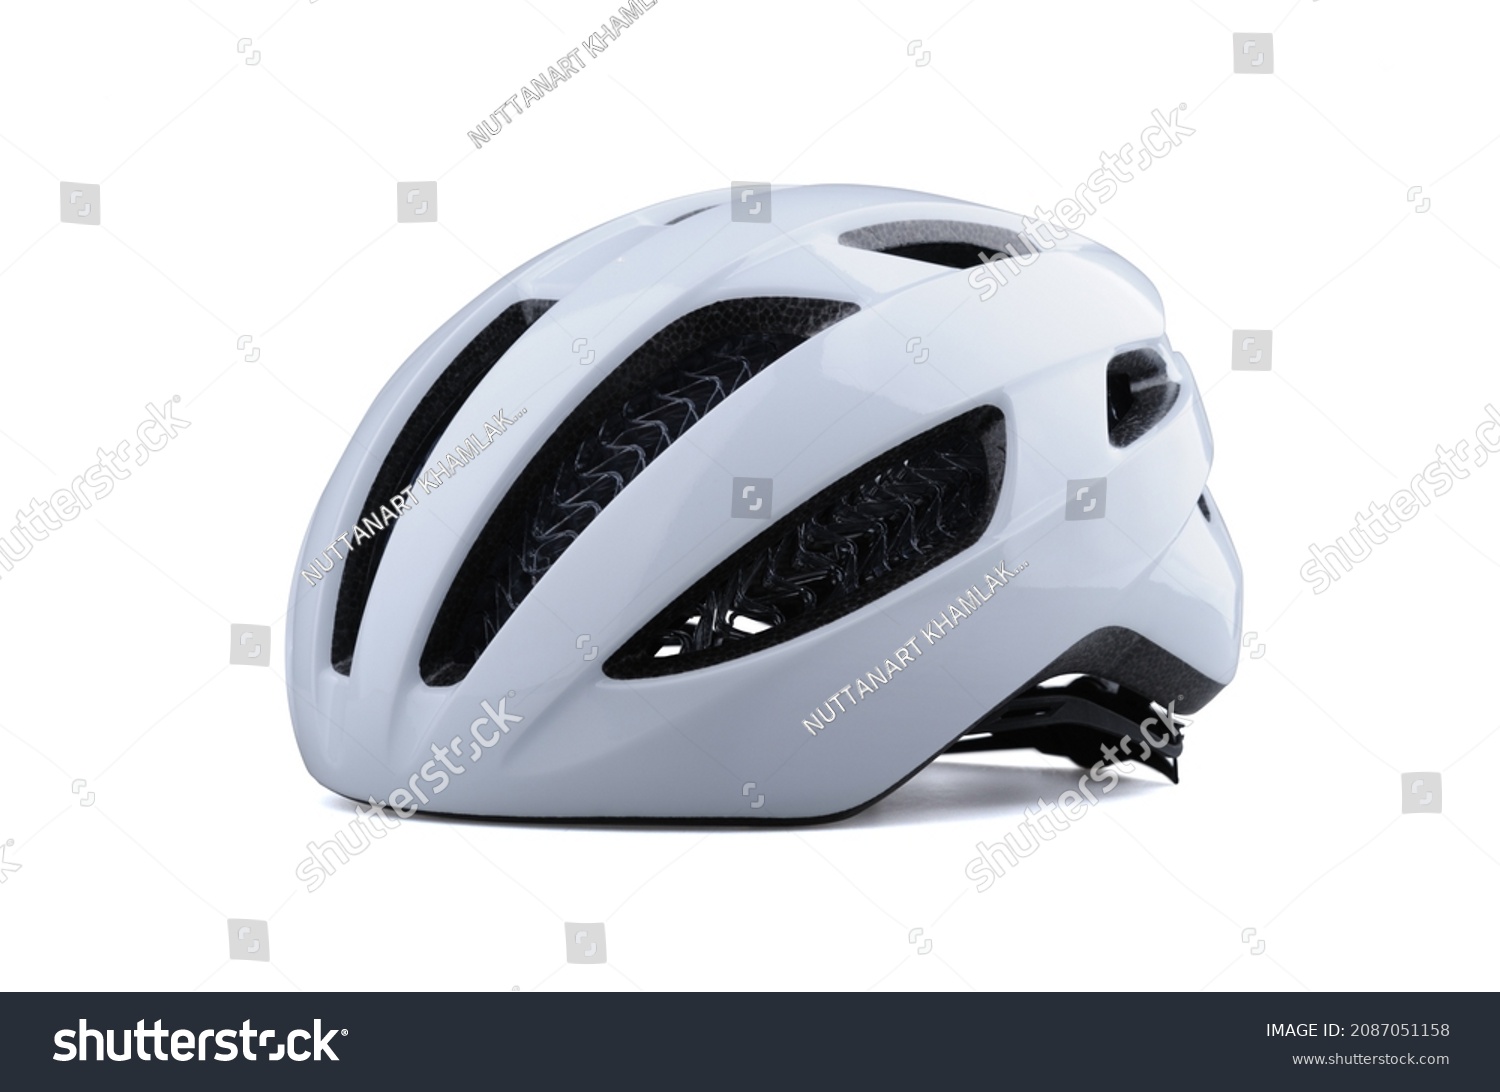 White bicycle helmet isolated on white background. Perspective view of bicycle helmet #2087051158